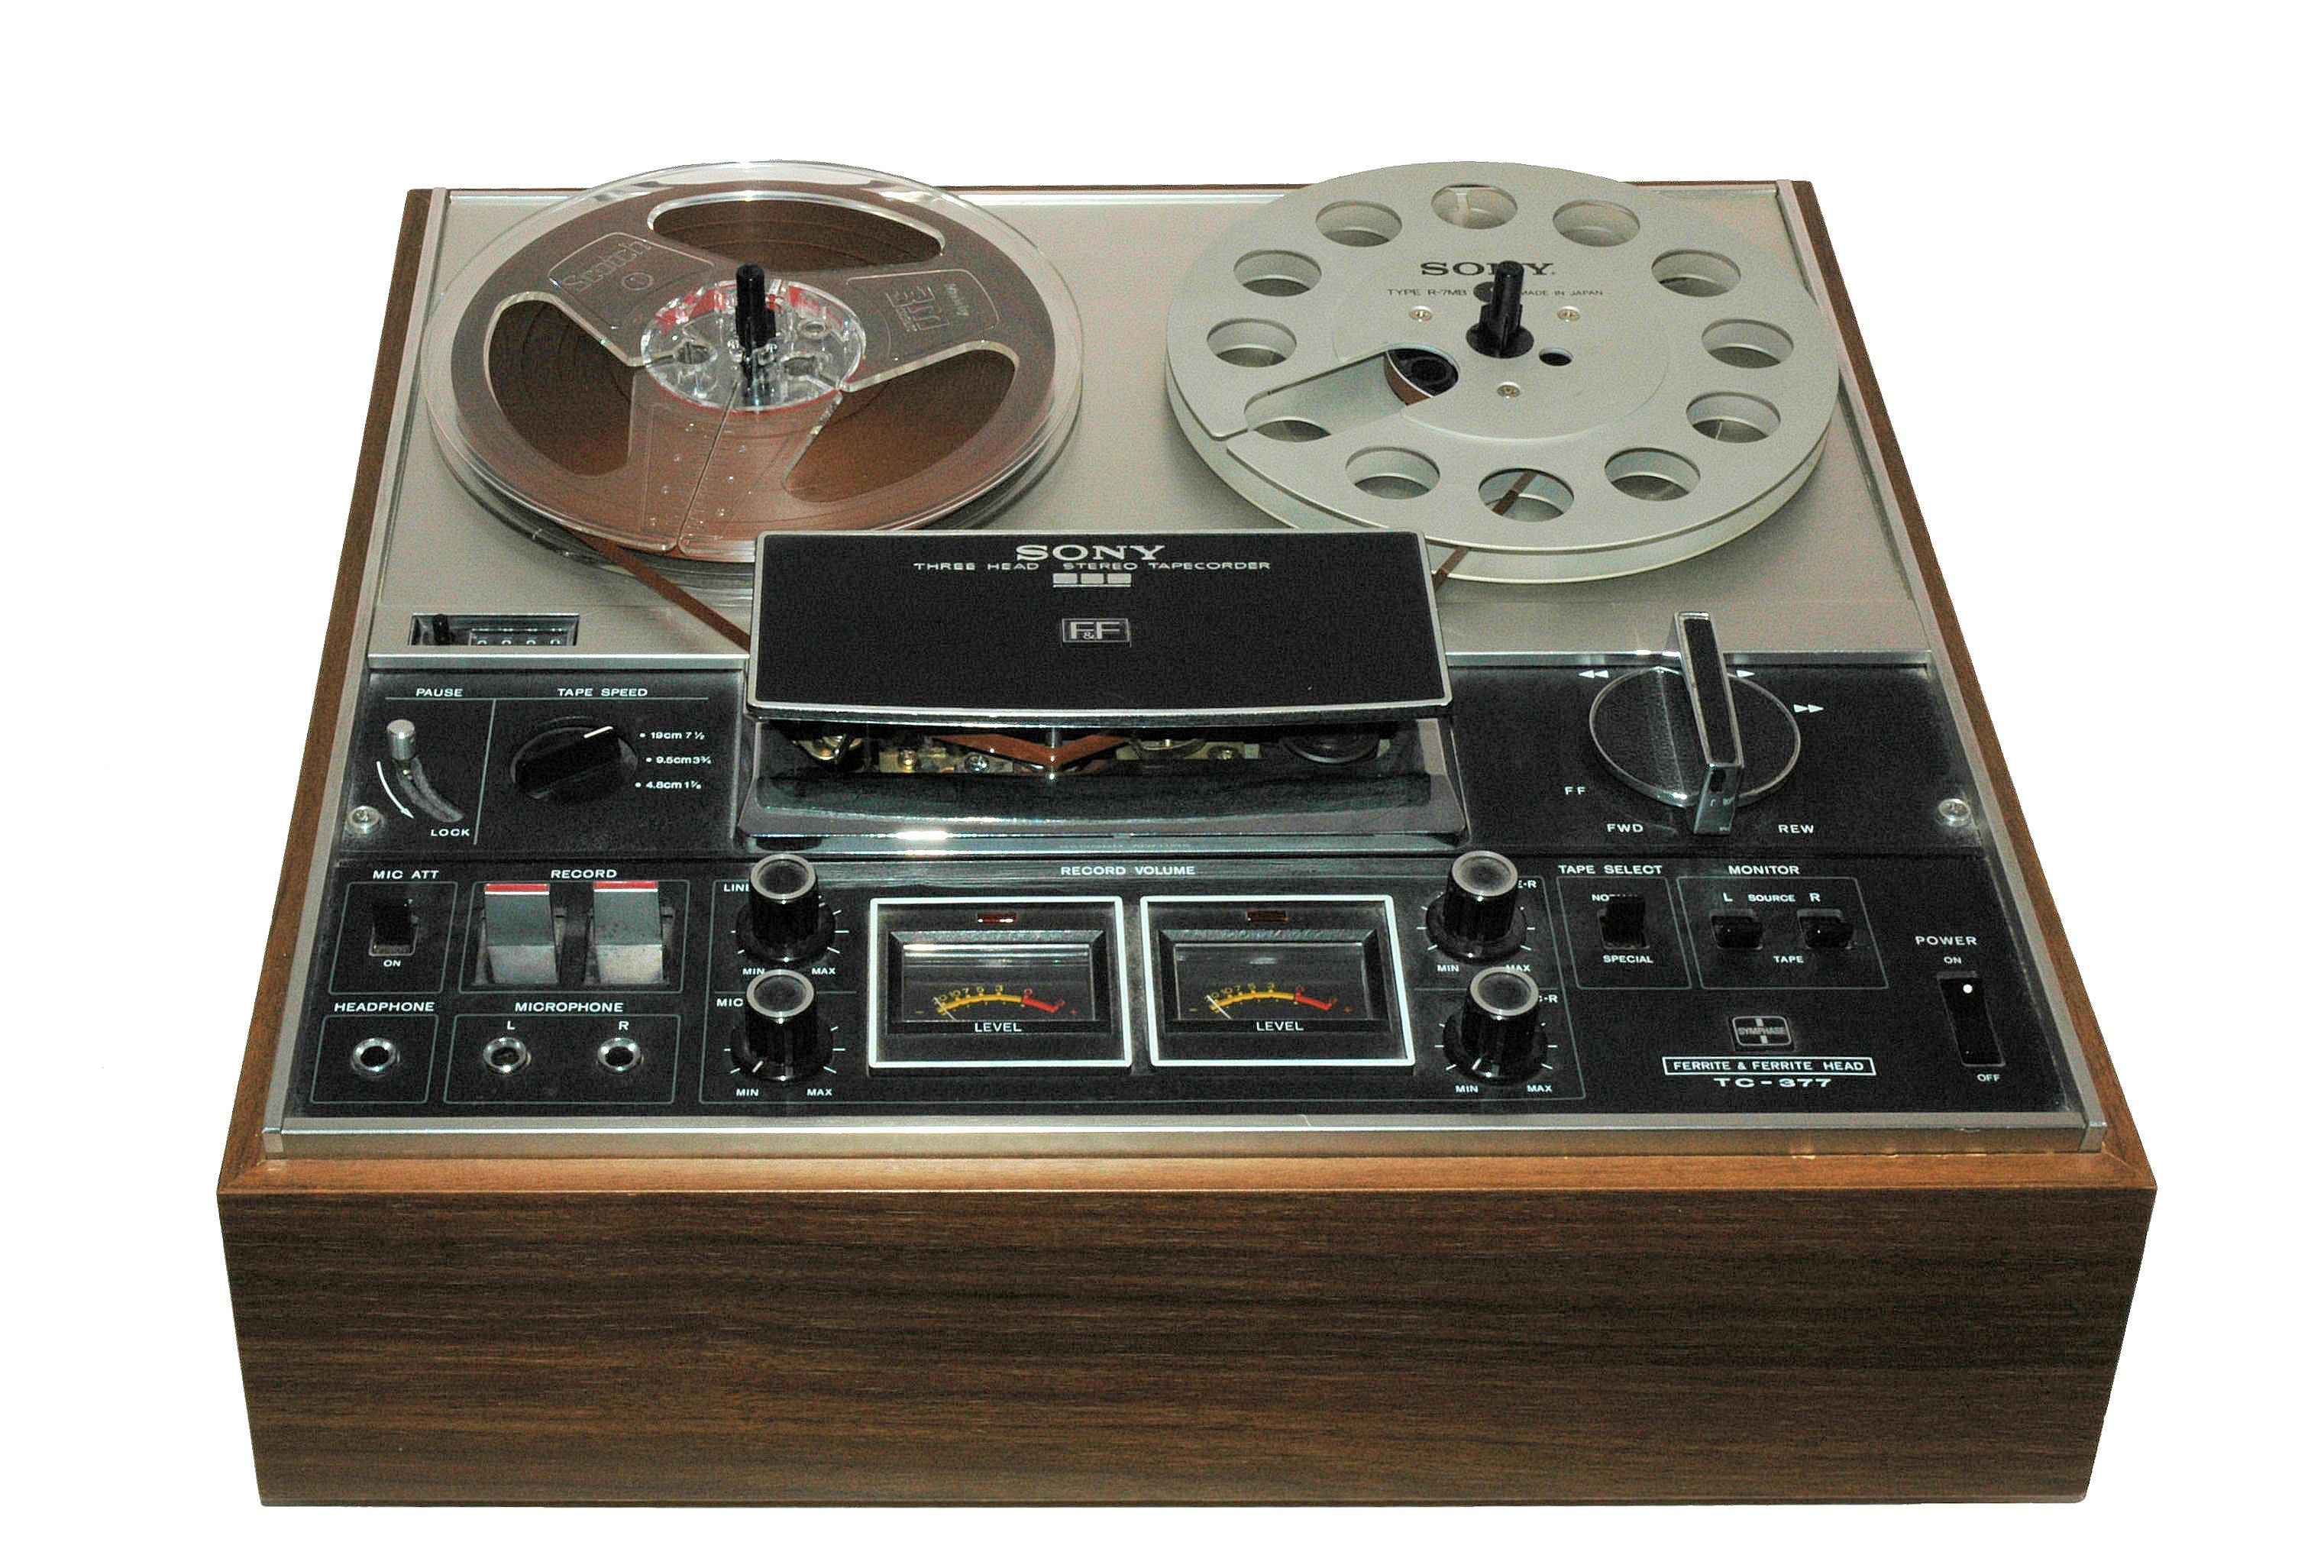 Reels For Reel-to-Reel Decks: Types, Sizes & Materials Compared